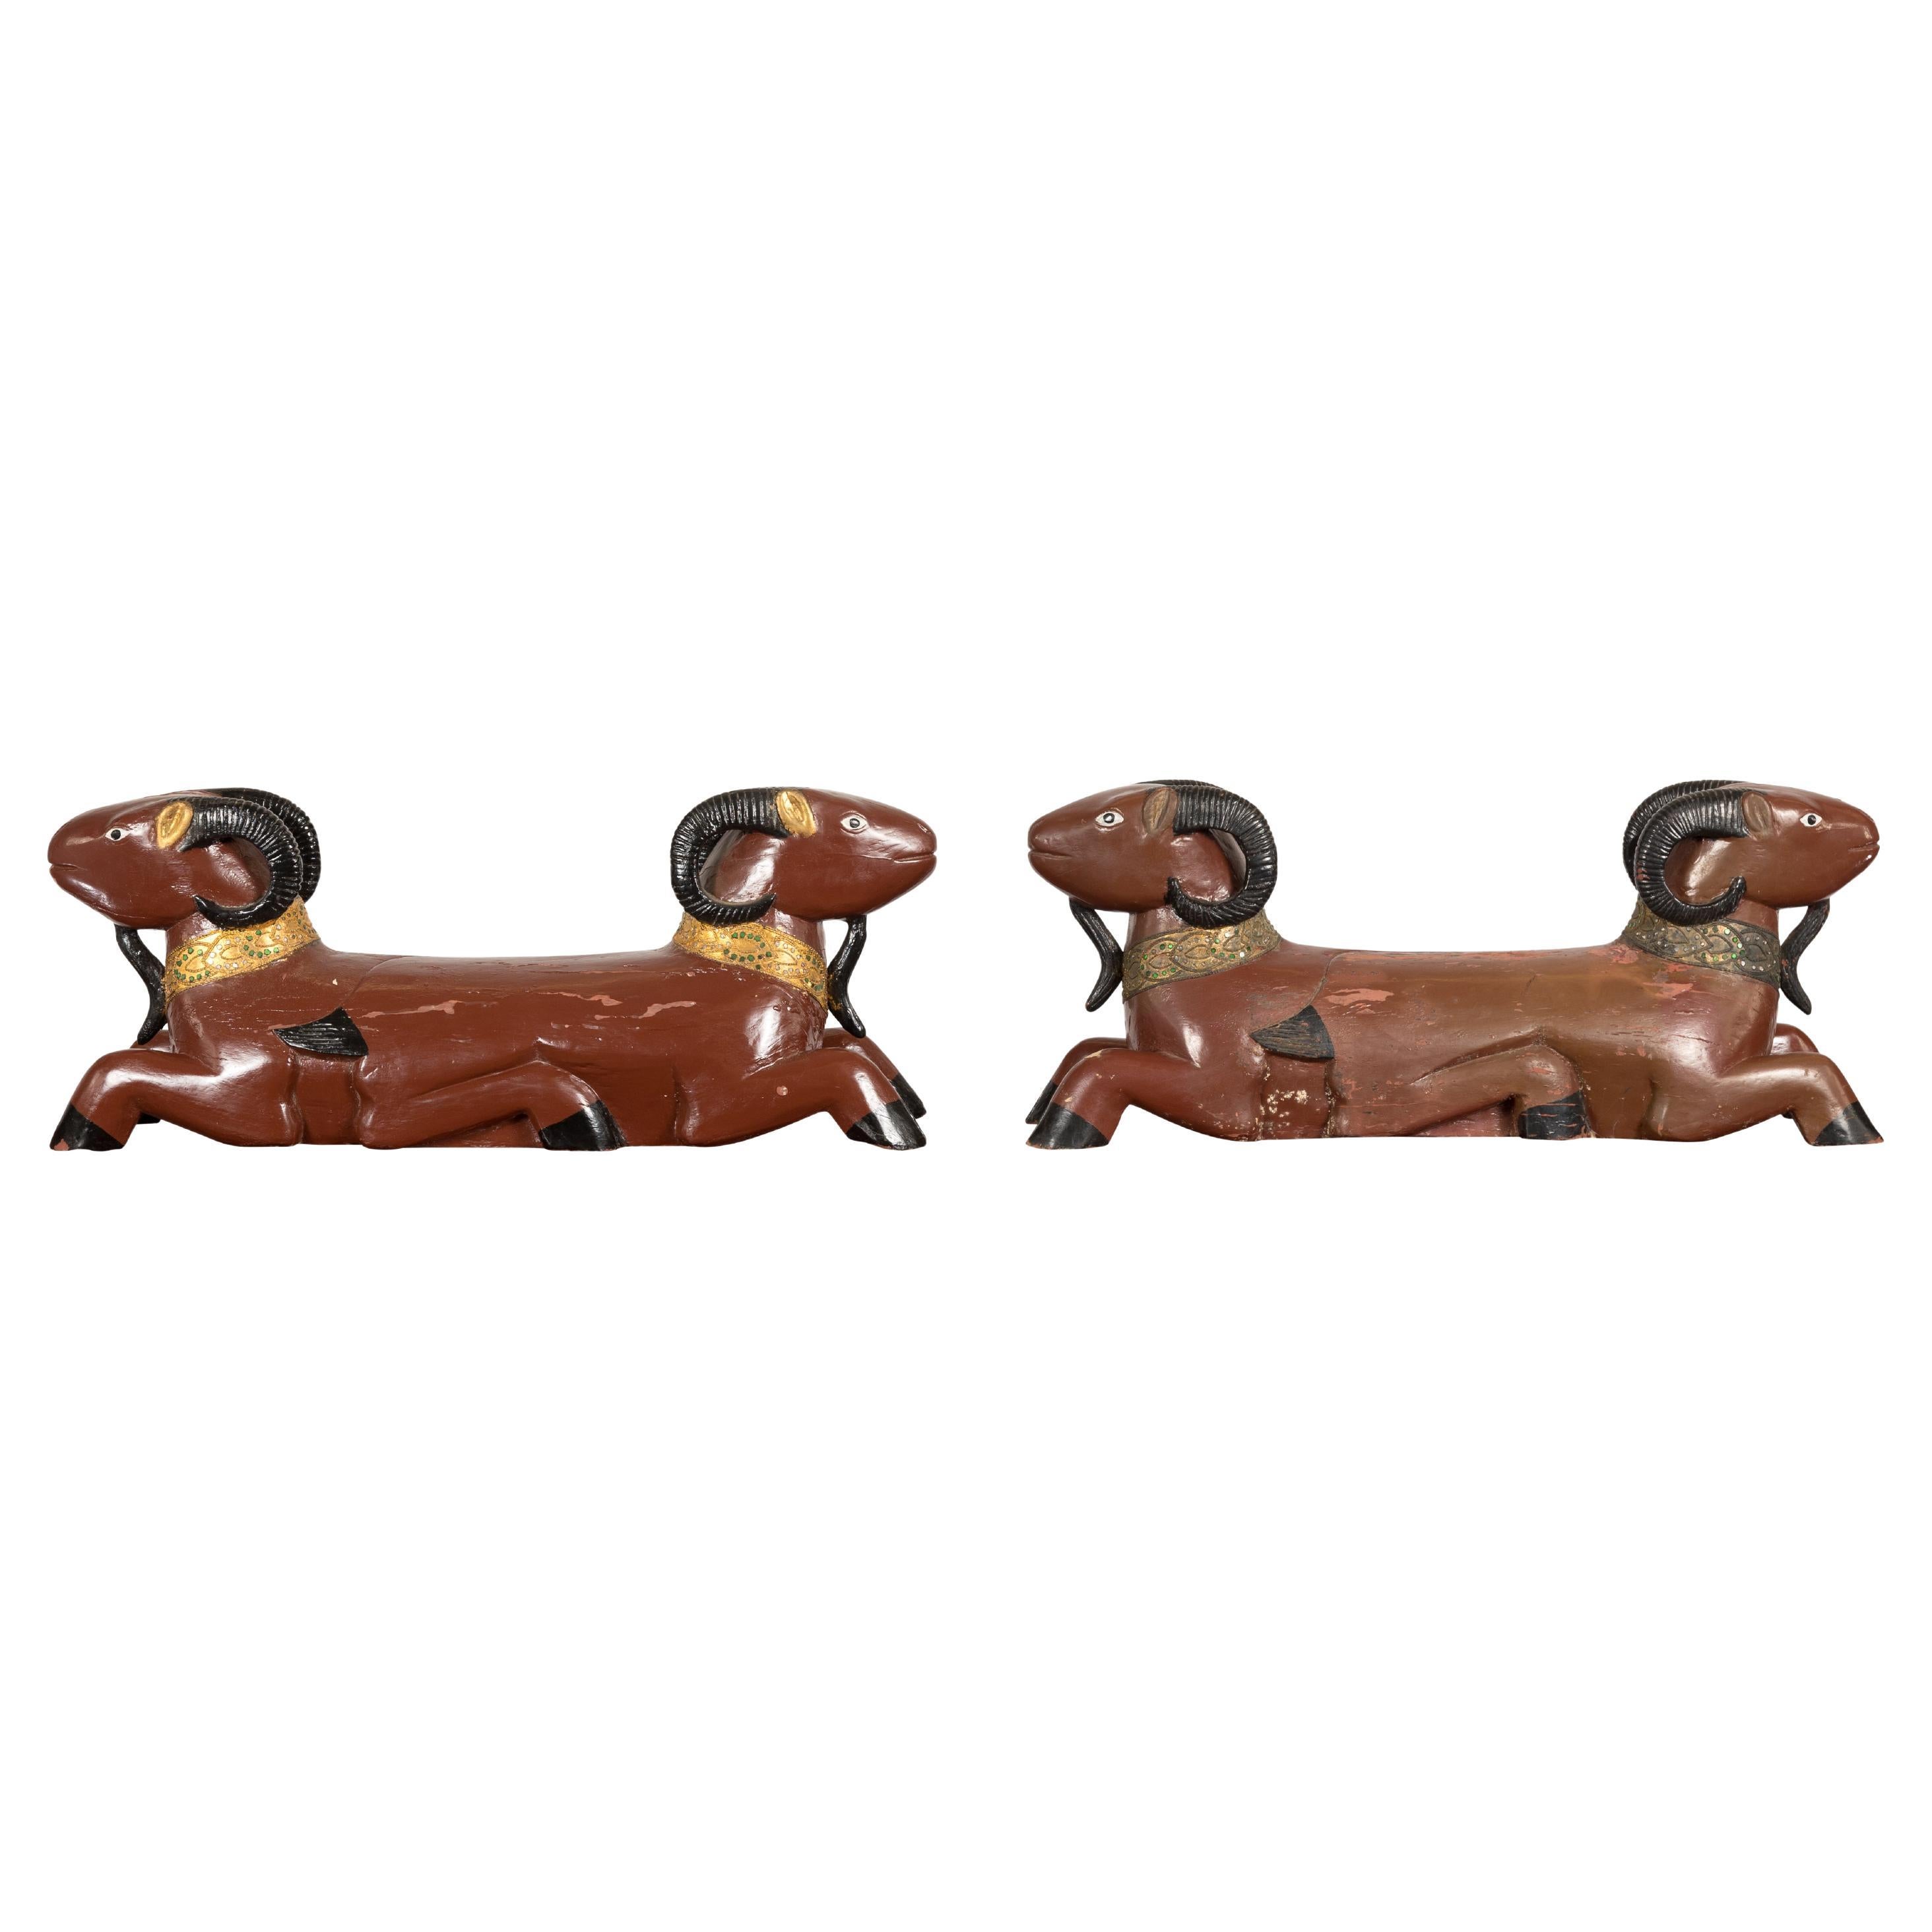 Pair of Vintage Northern Thai Double Ram Sculptures with Reddish Brown Lacquer For Sale